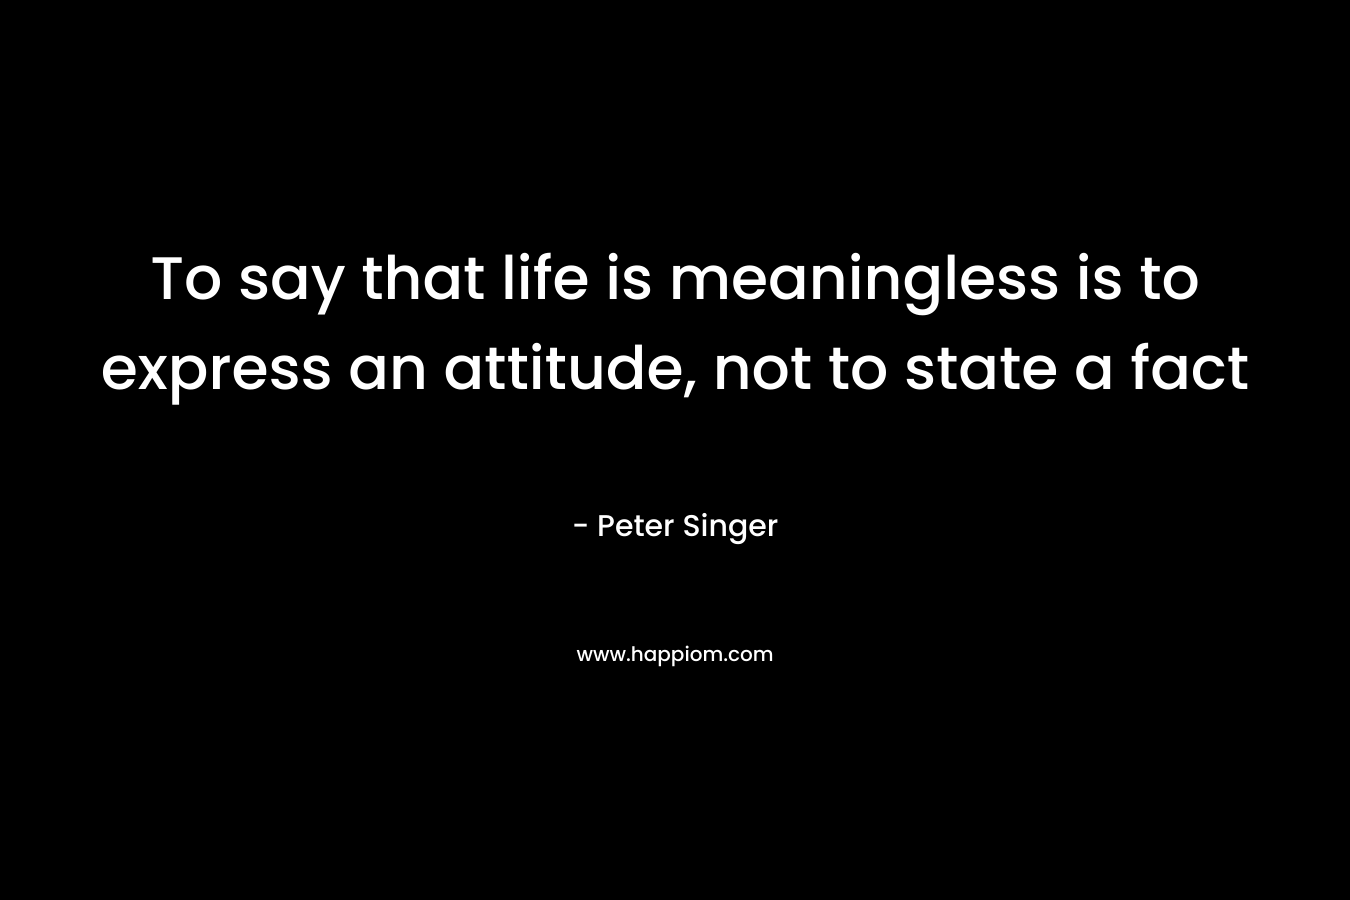 To say that life is meaningless is to express an attitude, not to state a fact – Peter Singer